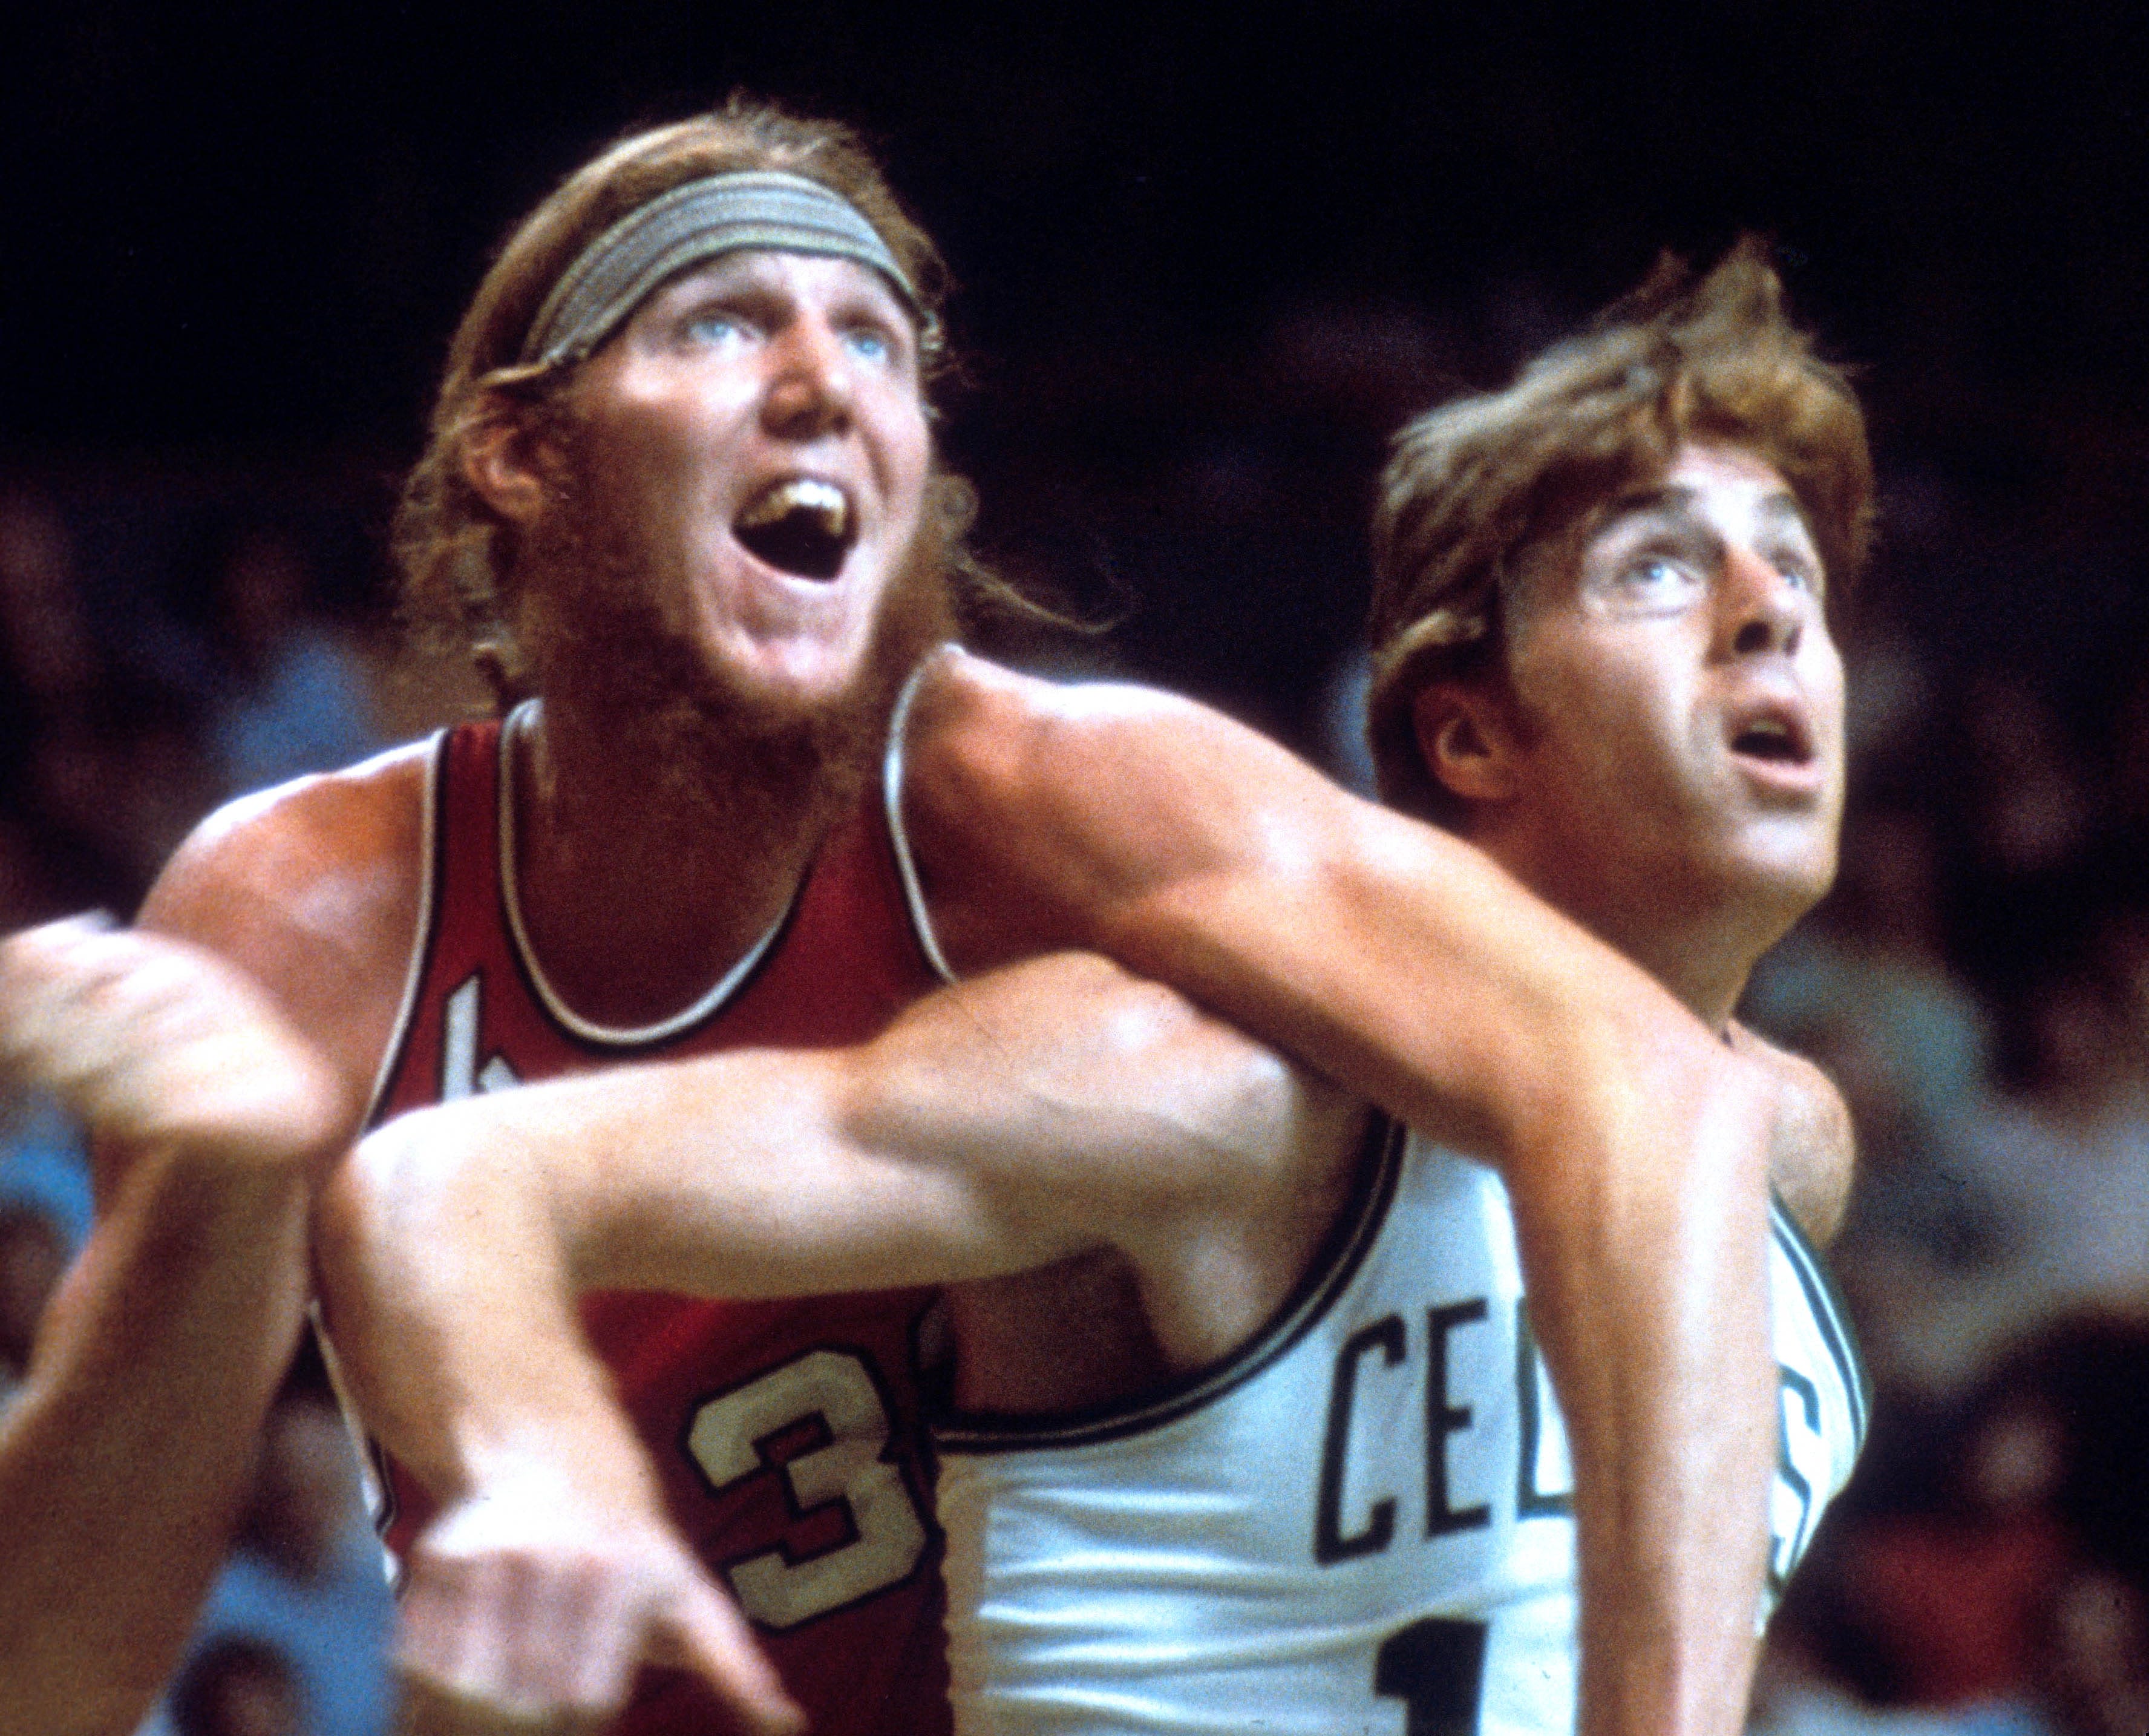 Celtics legend Dave Cowens showing off his shooting touch at 67